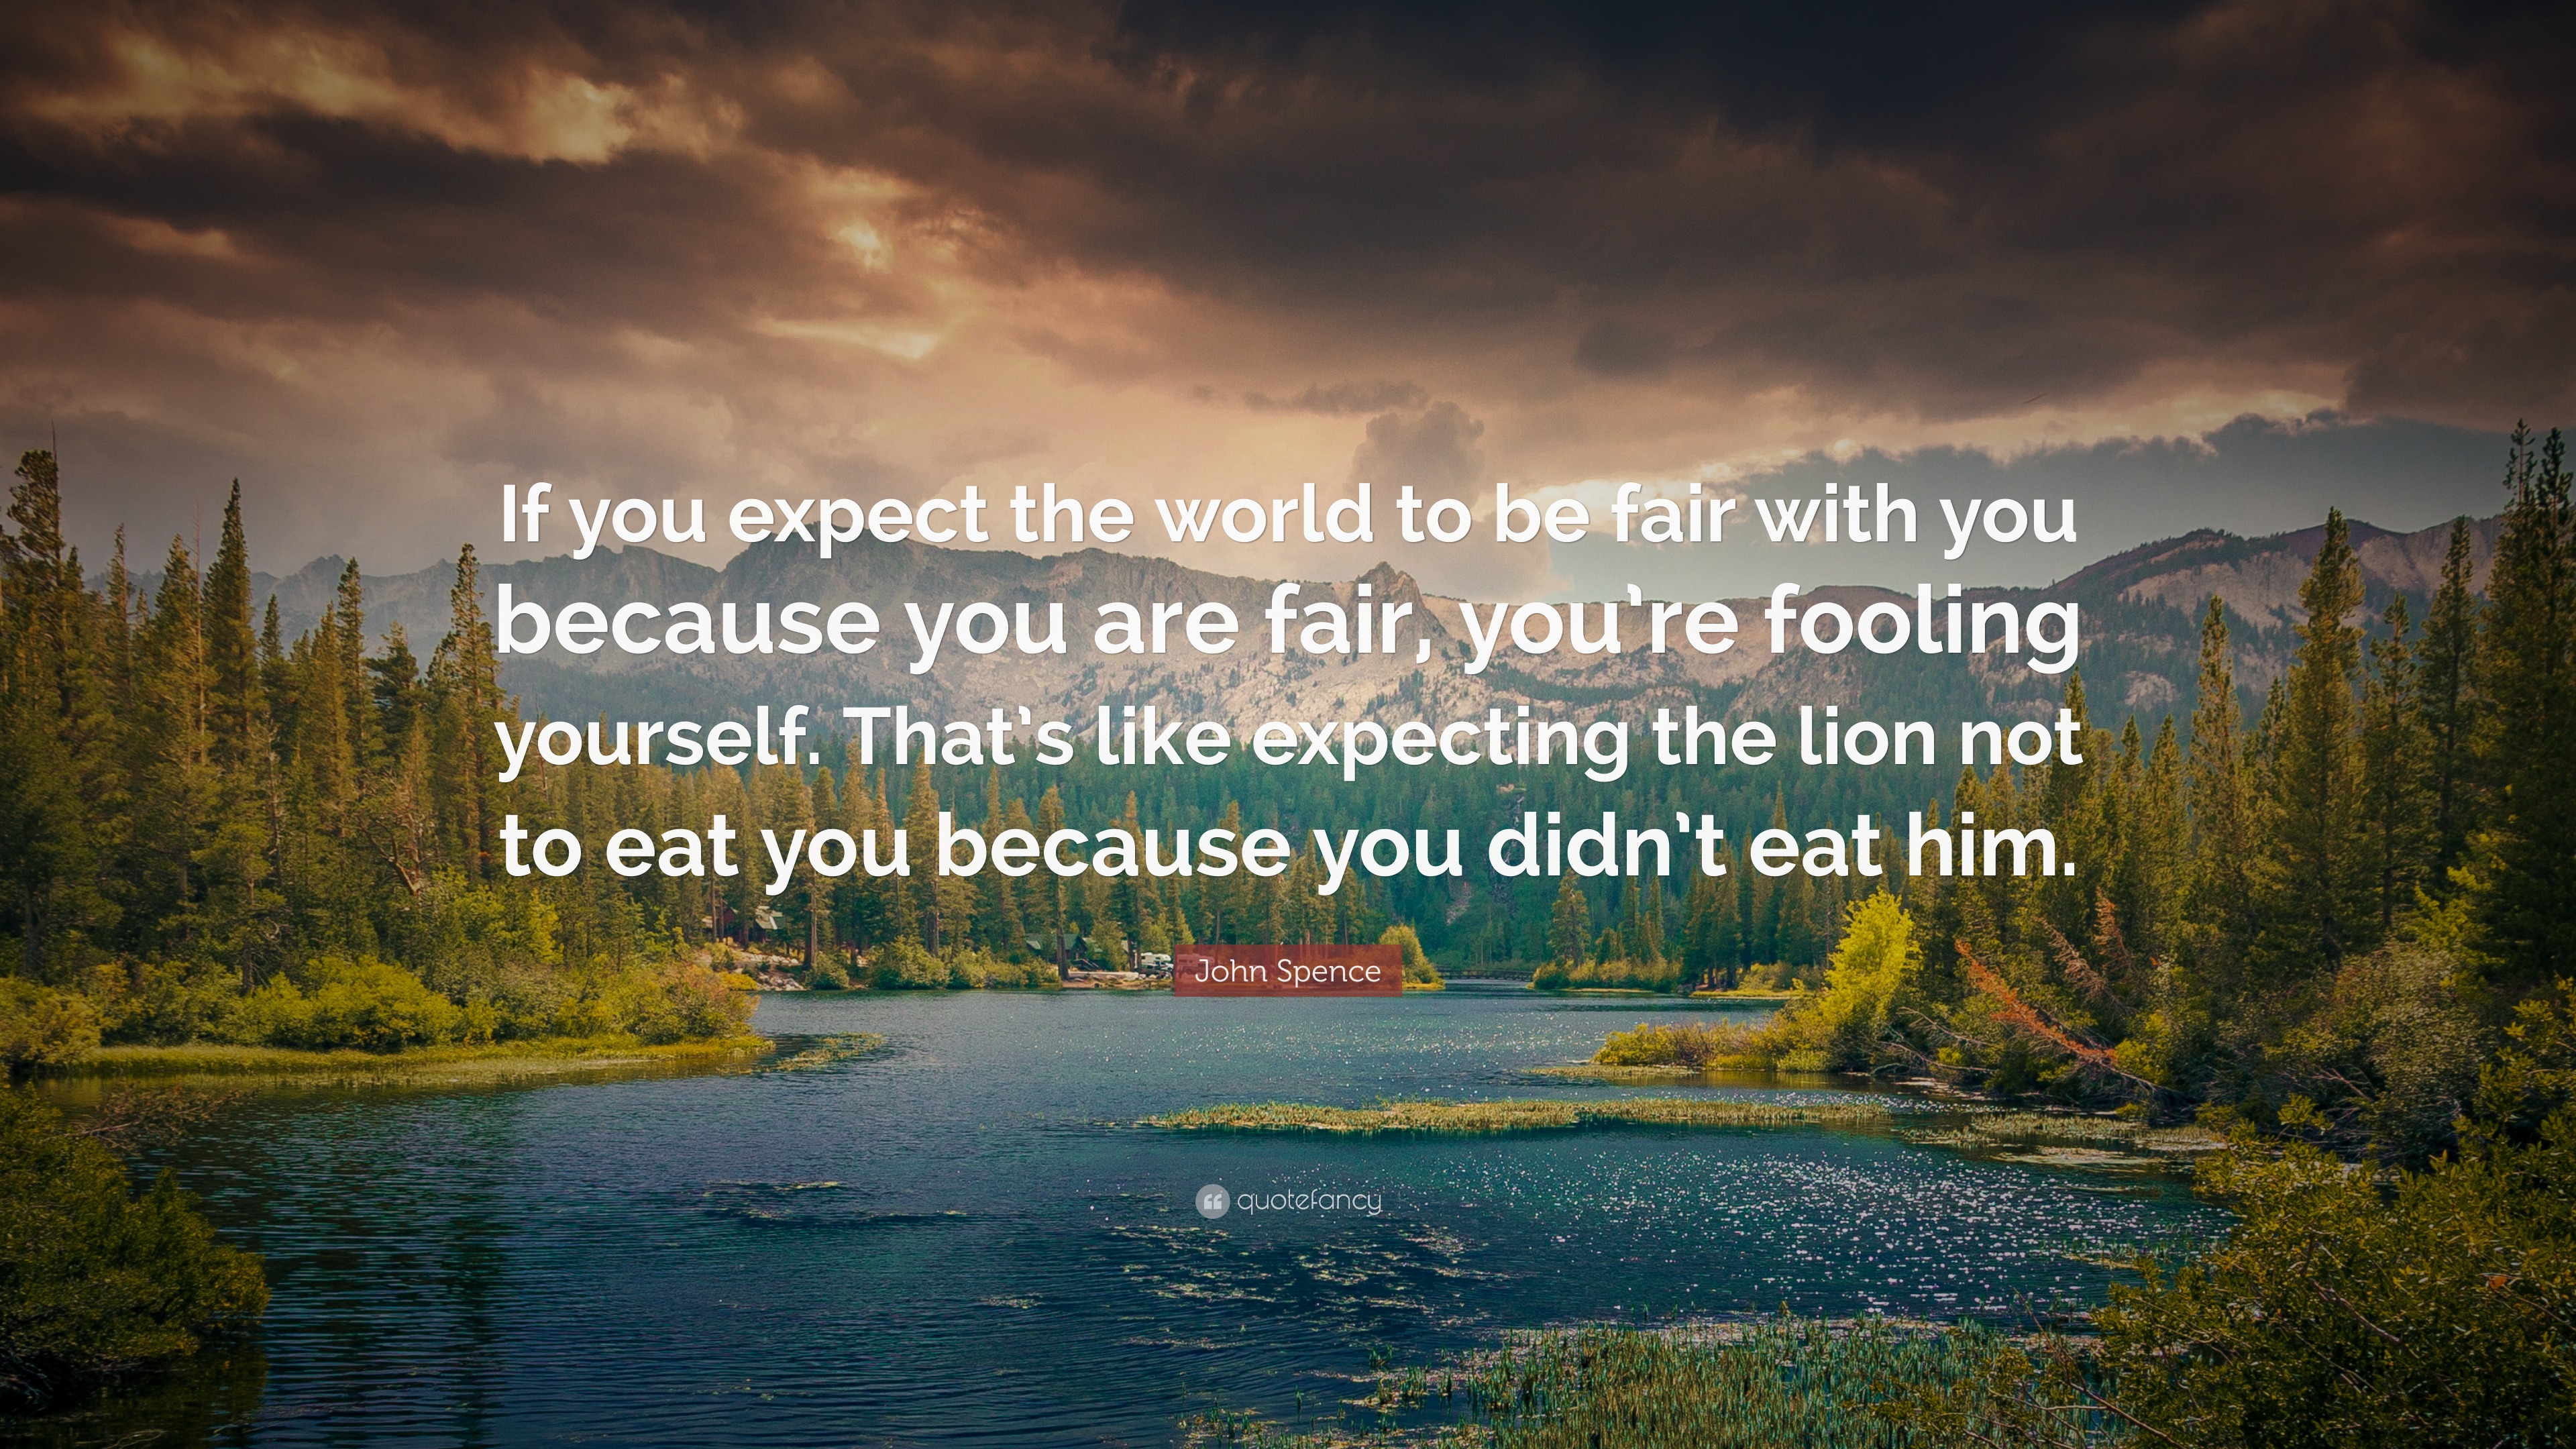 John Spence Quote: “If you expect the world to be fair with you because